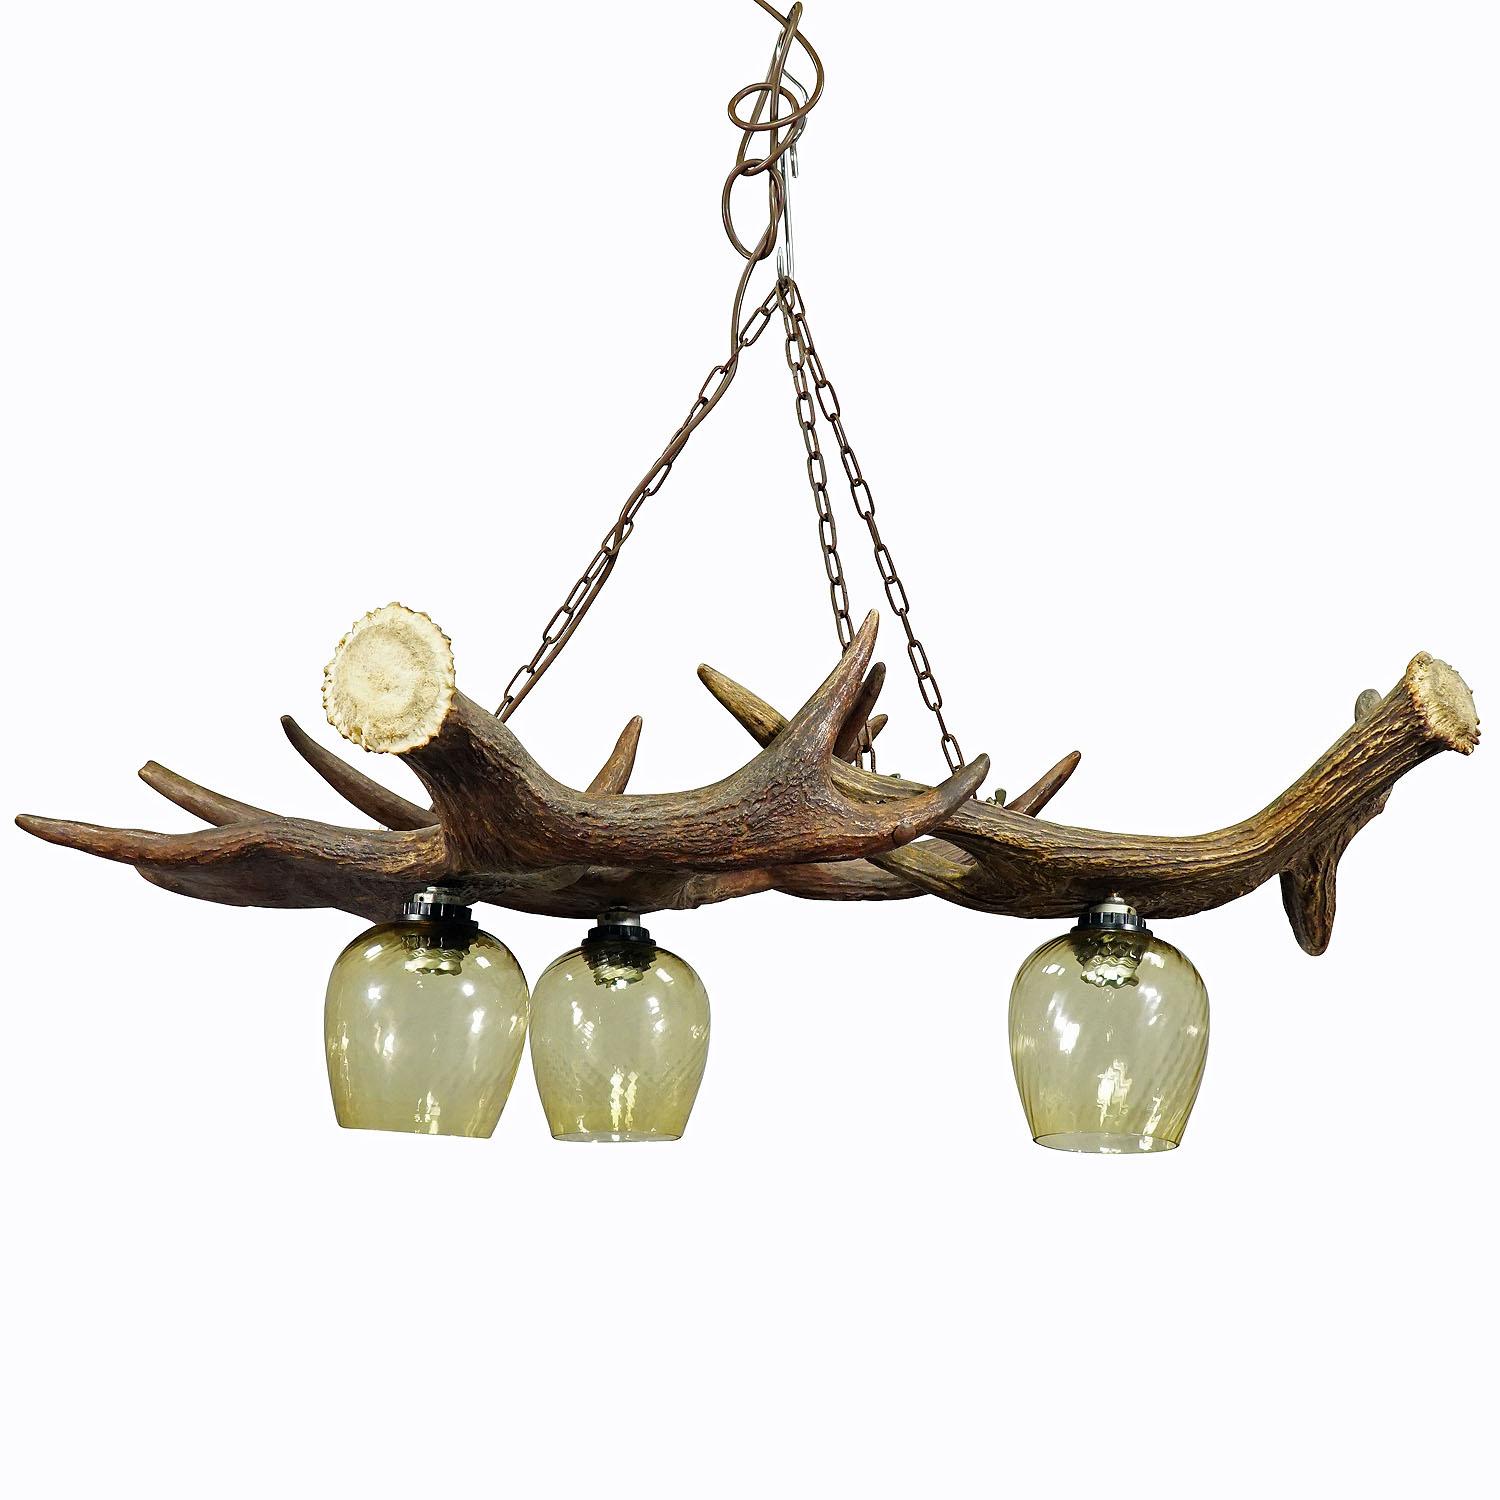 Rustic antler lamp with elk antlers

A large antler chandelier made of three joined elk antlers. The lamp comes with 3 spouts and vintage glass shades. Manufactured in Germany ca. 1960.

Antler furniture have been one of the popular novelties of the